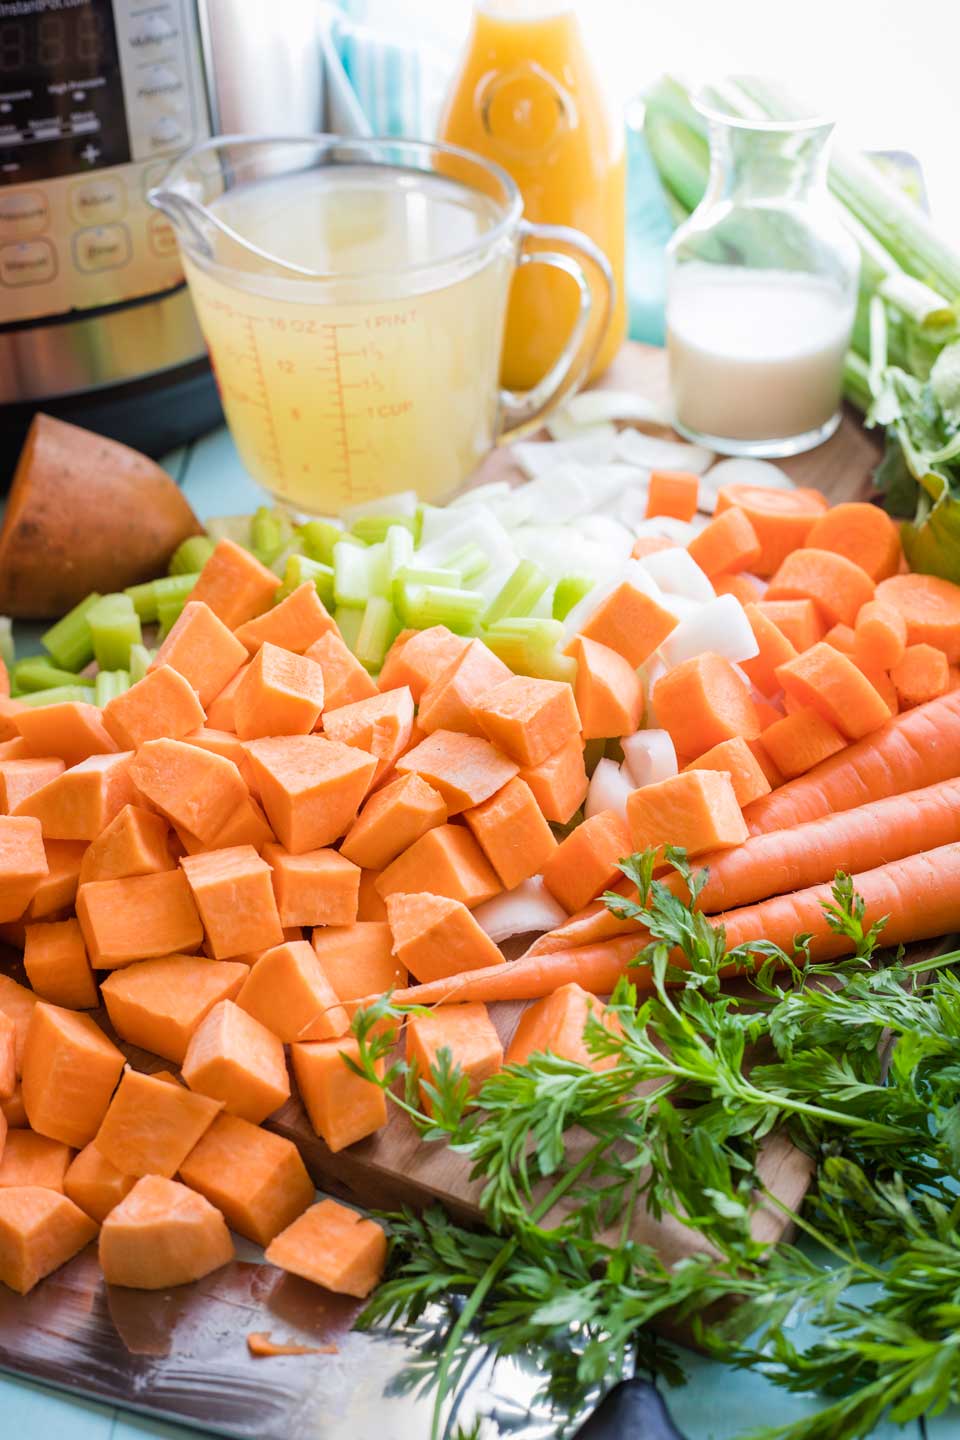 prepared soup ingredients - chopped sweet potatoes, carrots, celery, and onions